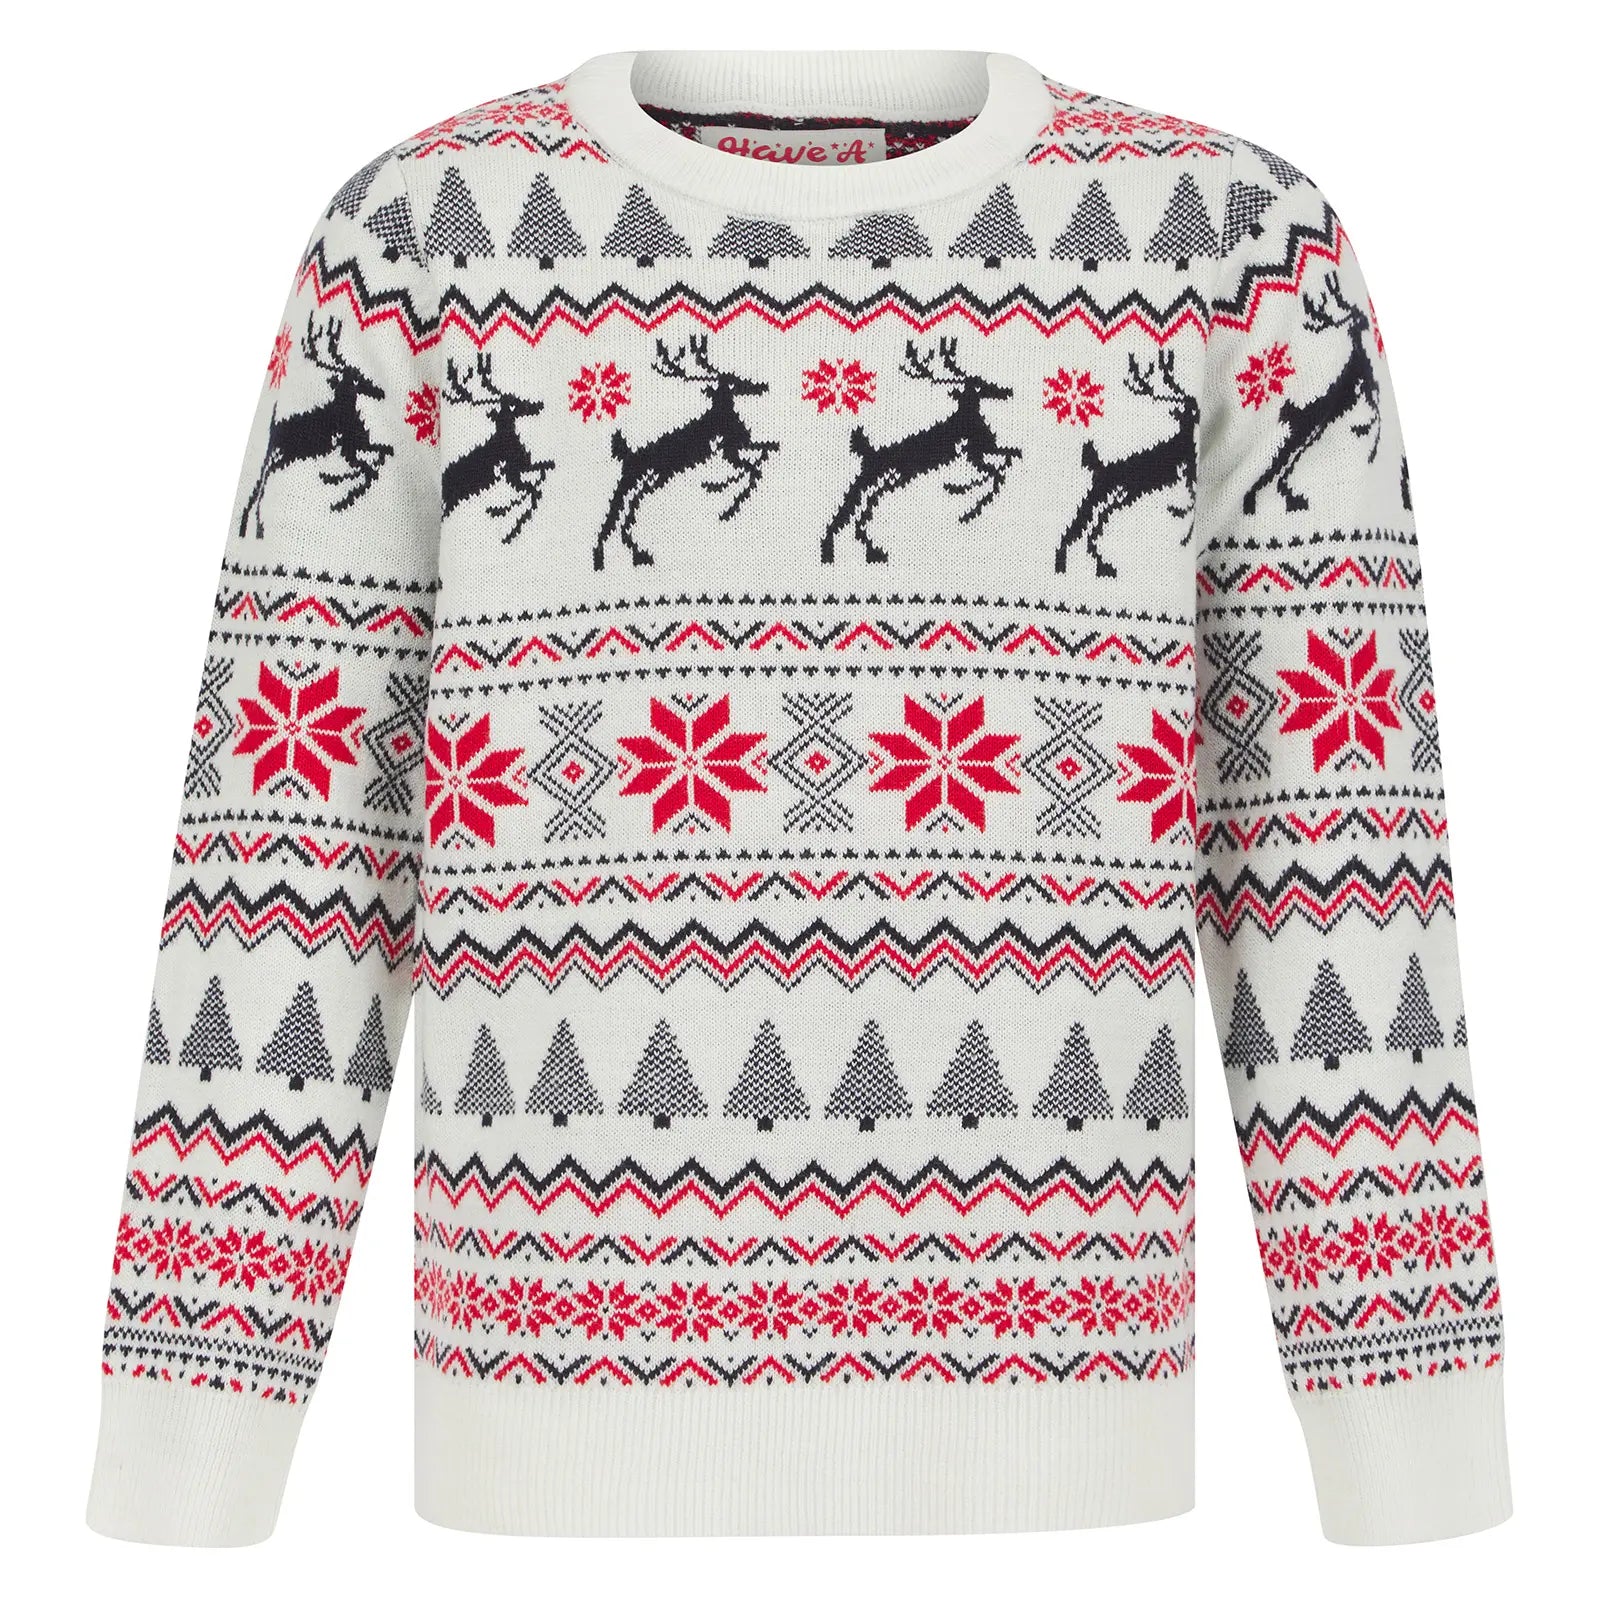 white christmas jumper featuring festive fair isle pattern with dancing reindeers, snowflakes, christmas trees and zig zag patterns, with a crew neckline and ribbed arm cuffs